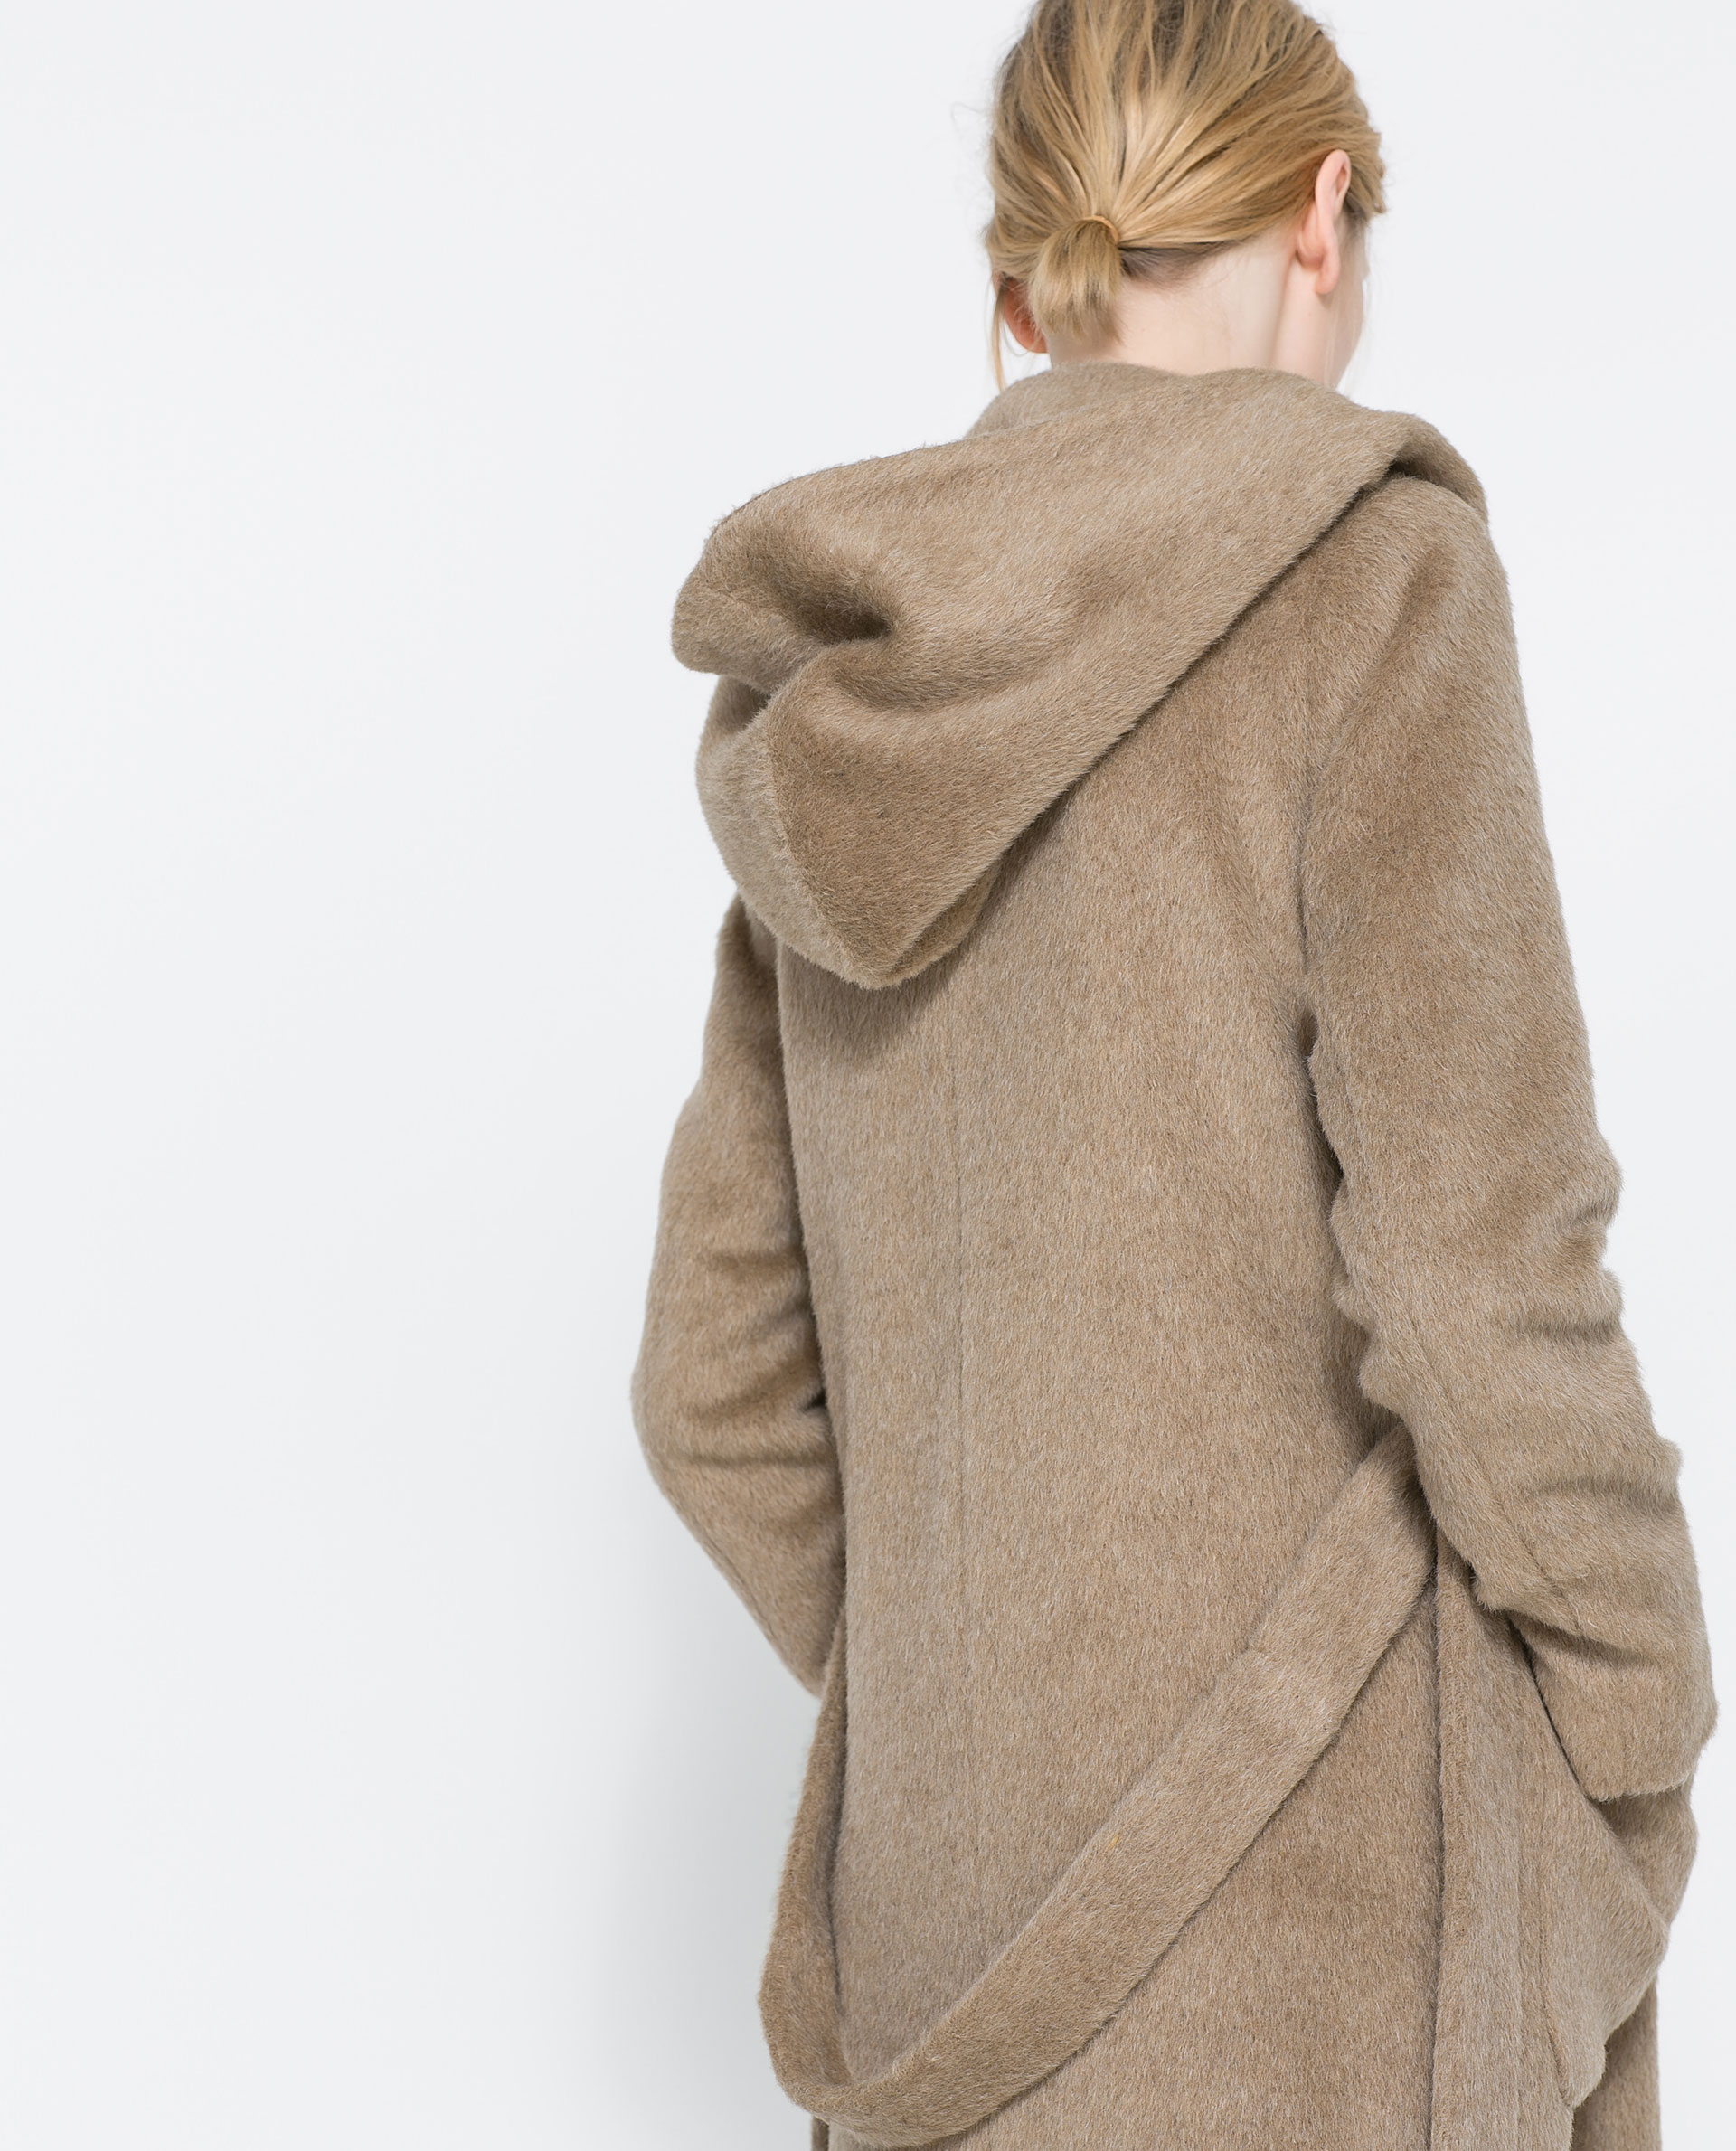 Zara Belted Coat with Hood in Natural | Lyst